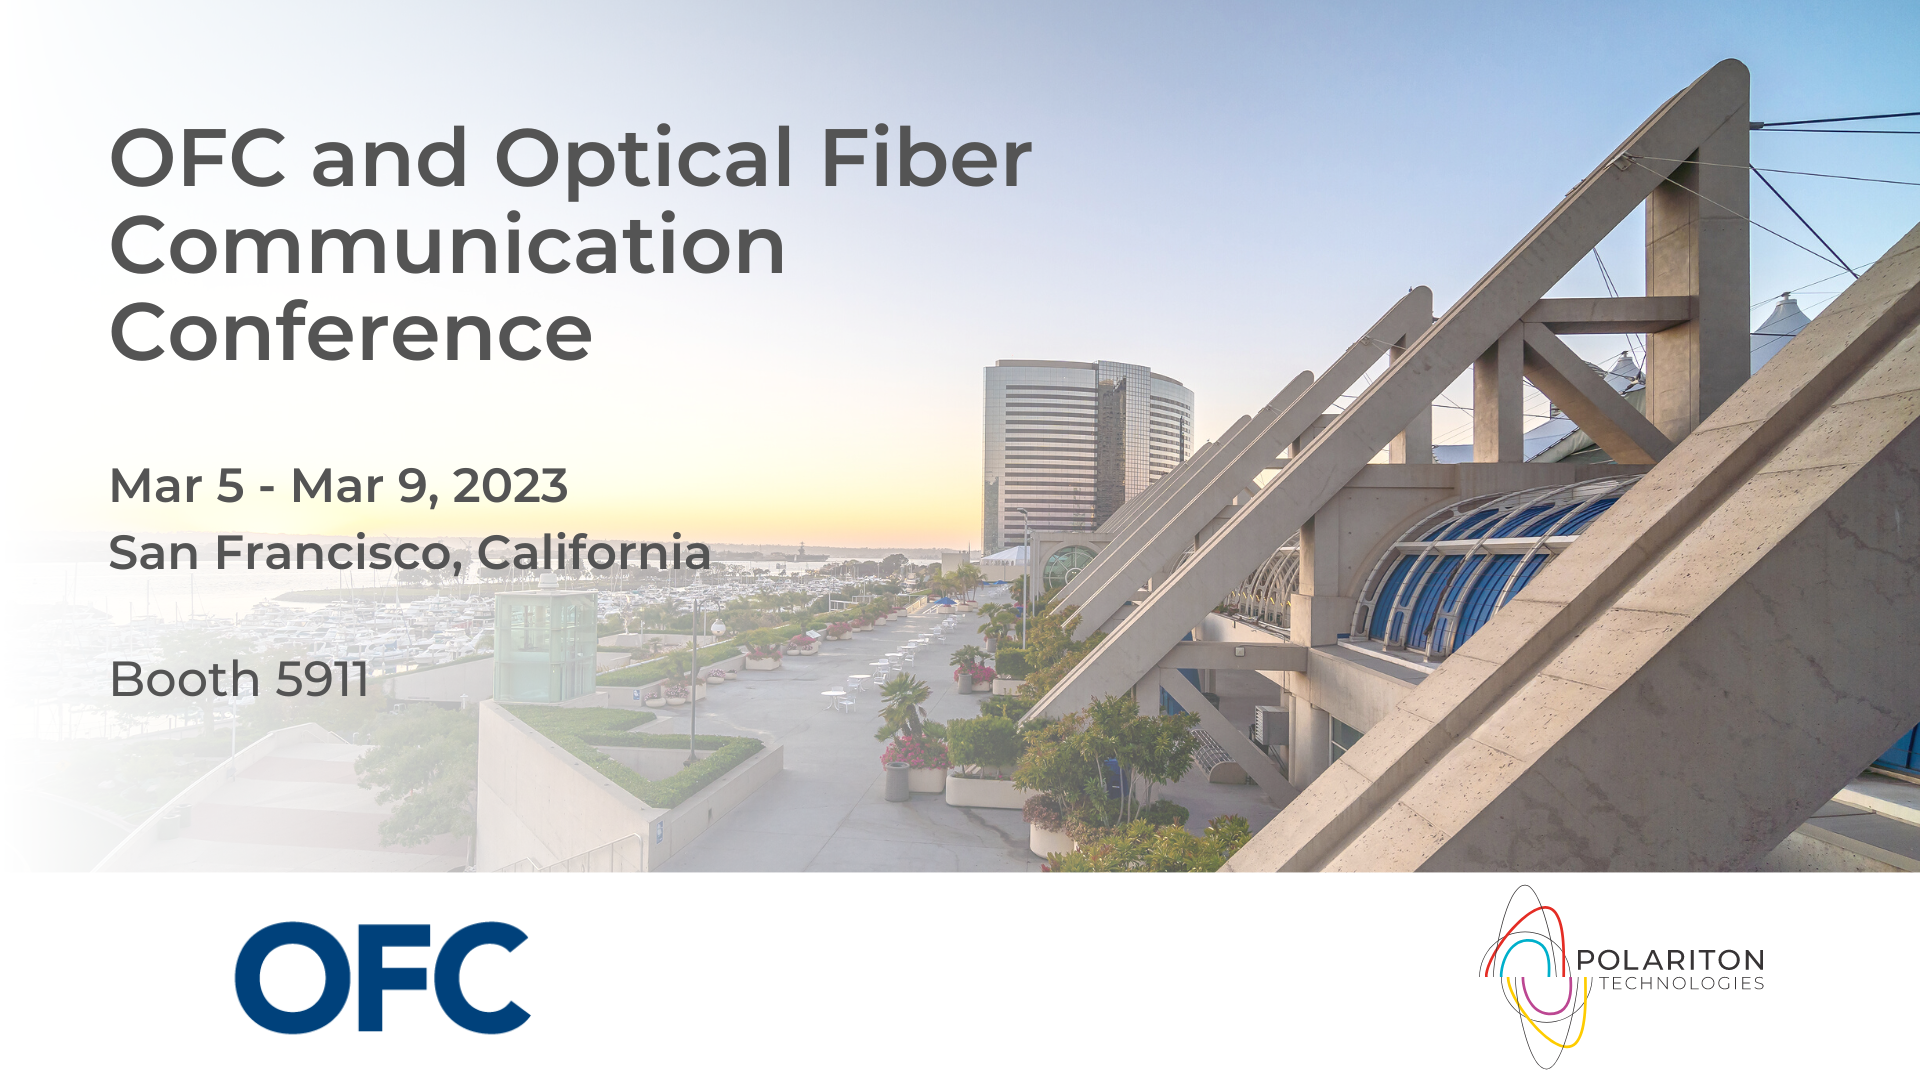 OFC and Optical Fiber Communication Conference 2023 and Polariton